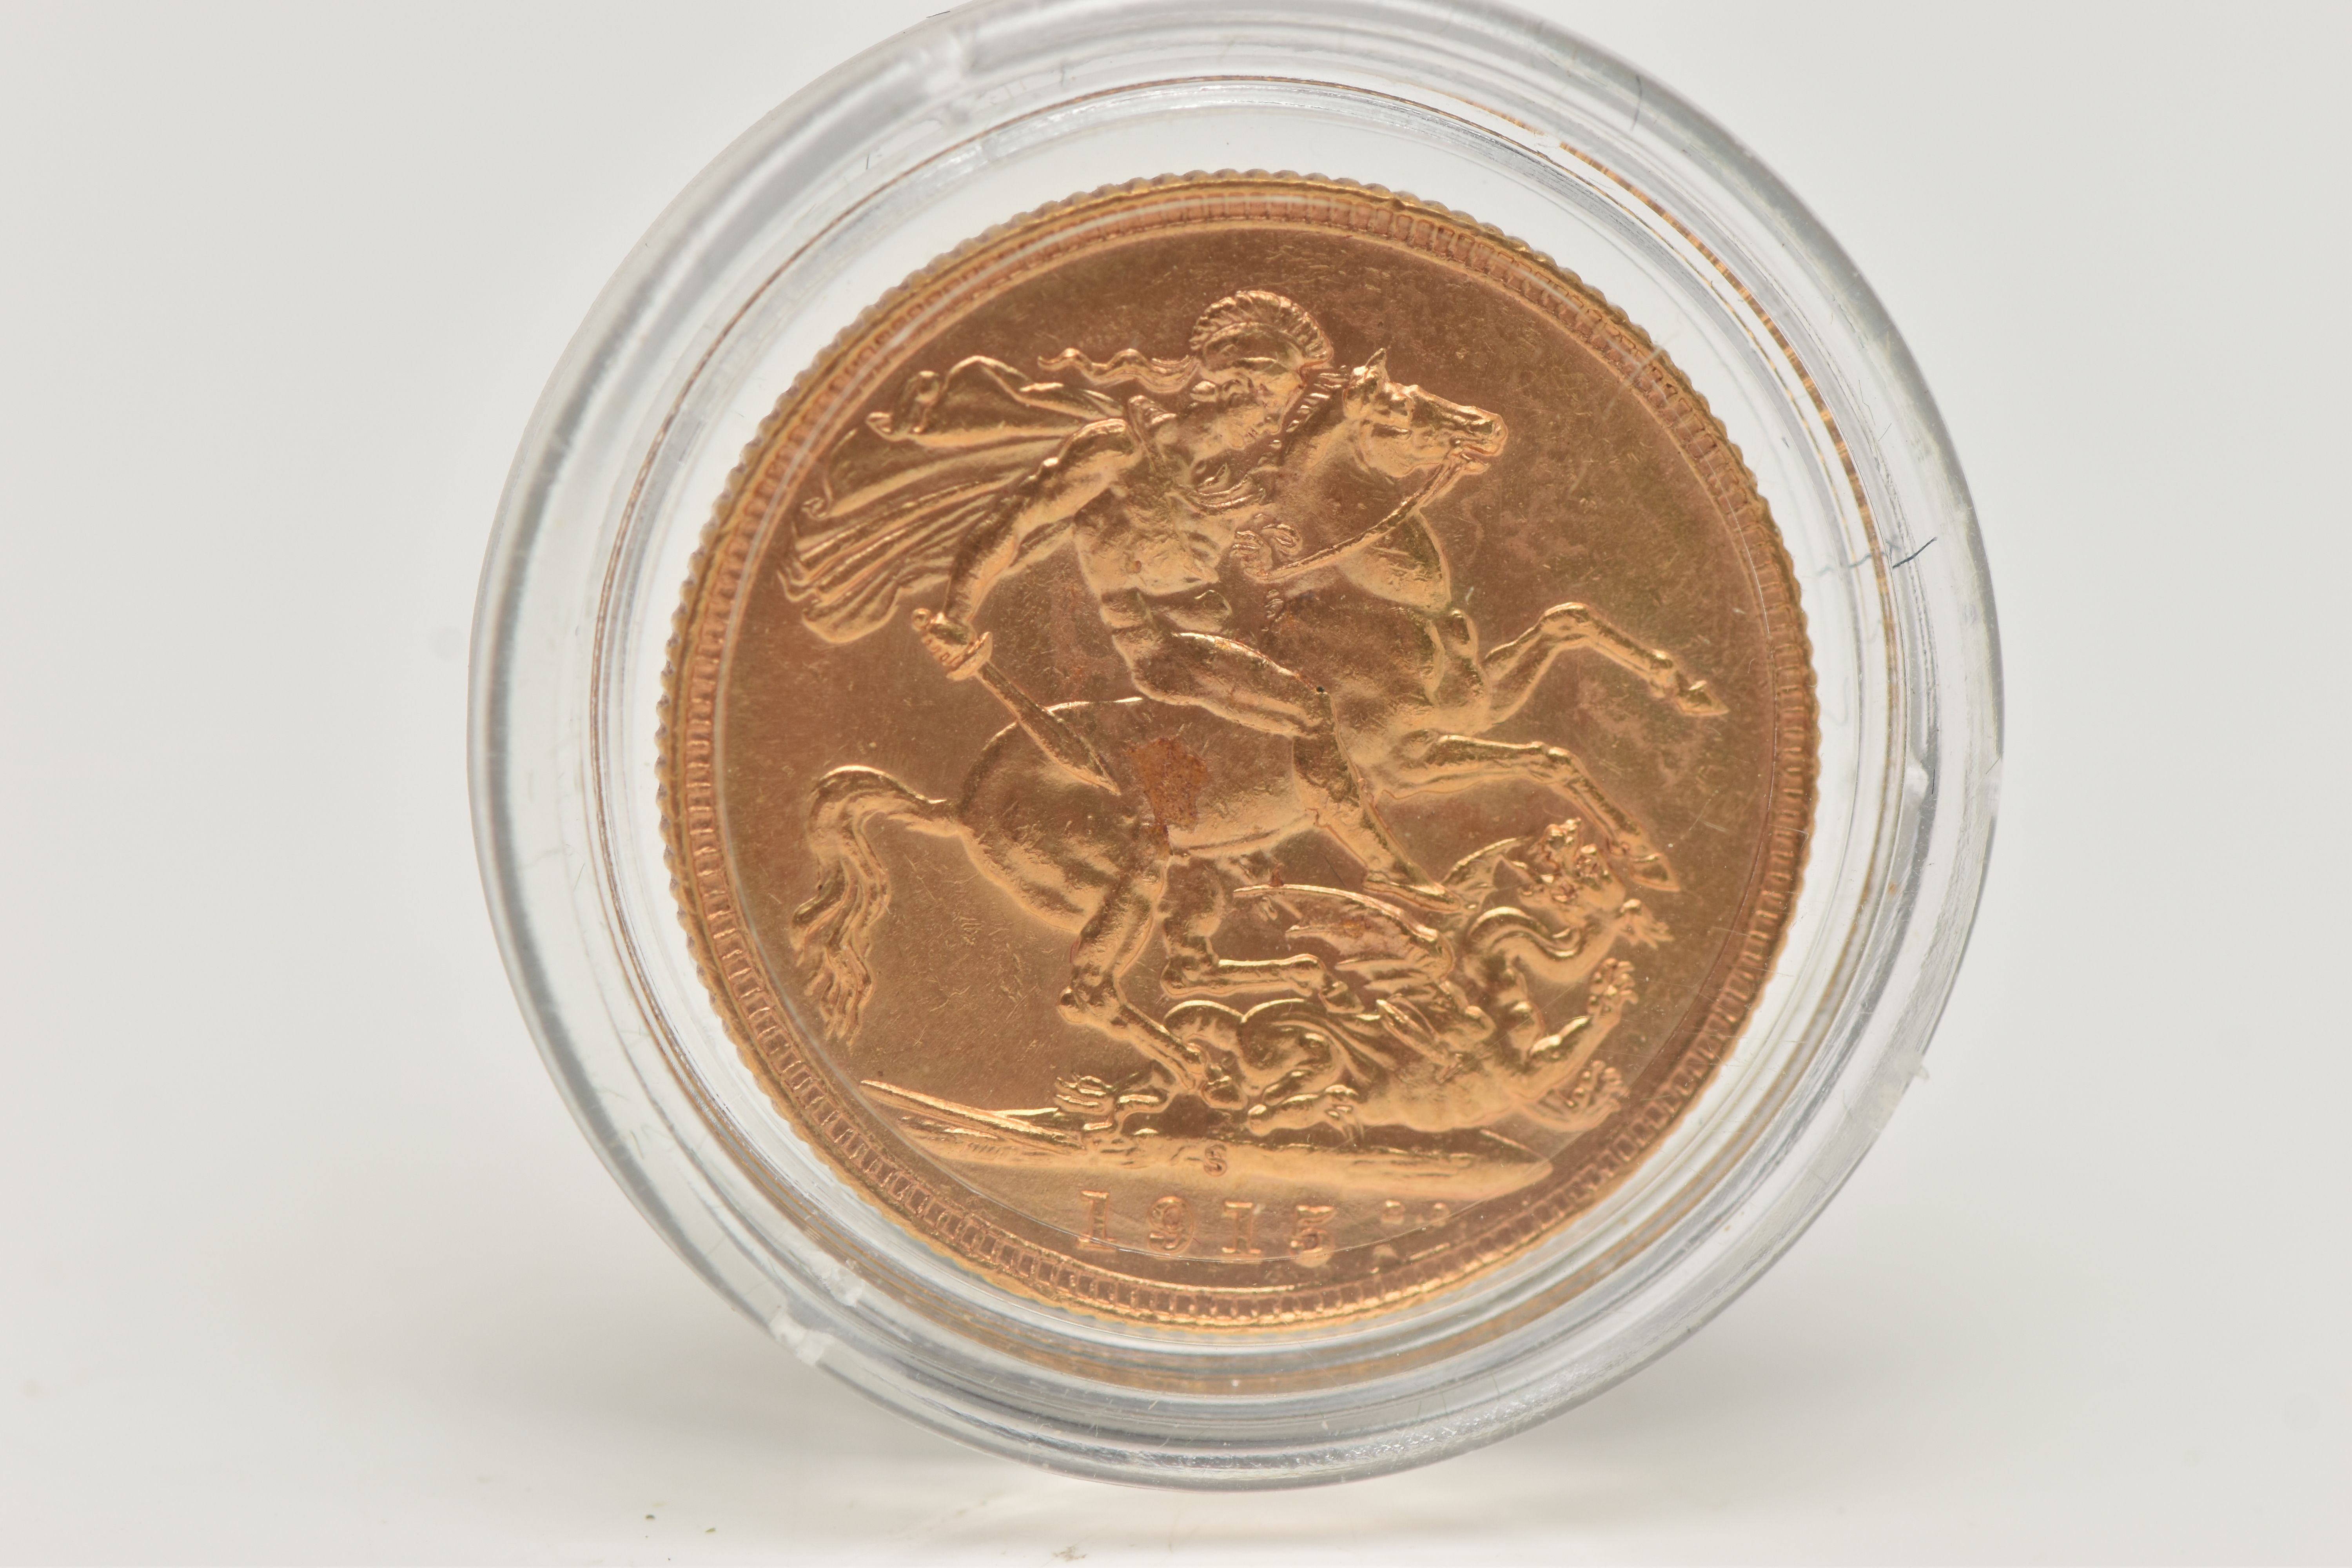 A FULL GOLD SOVEREIGN COIN SYDNEY MINT 1915, depicting George V, 22ct, 7.98 grams, 22.05mm diameter